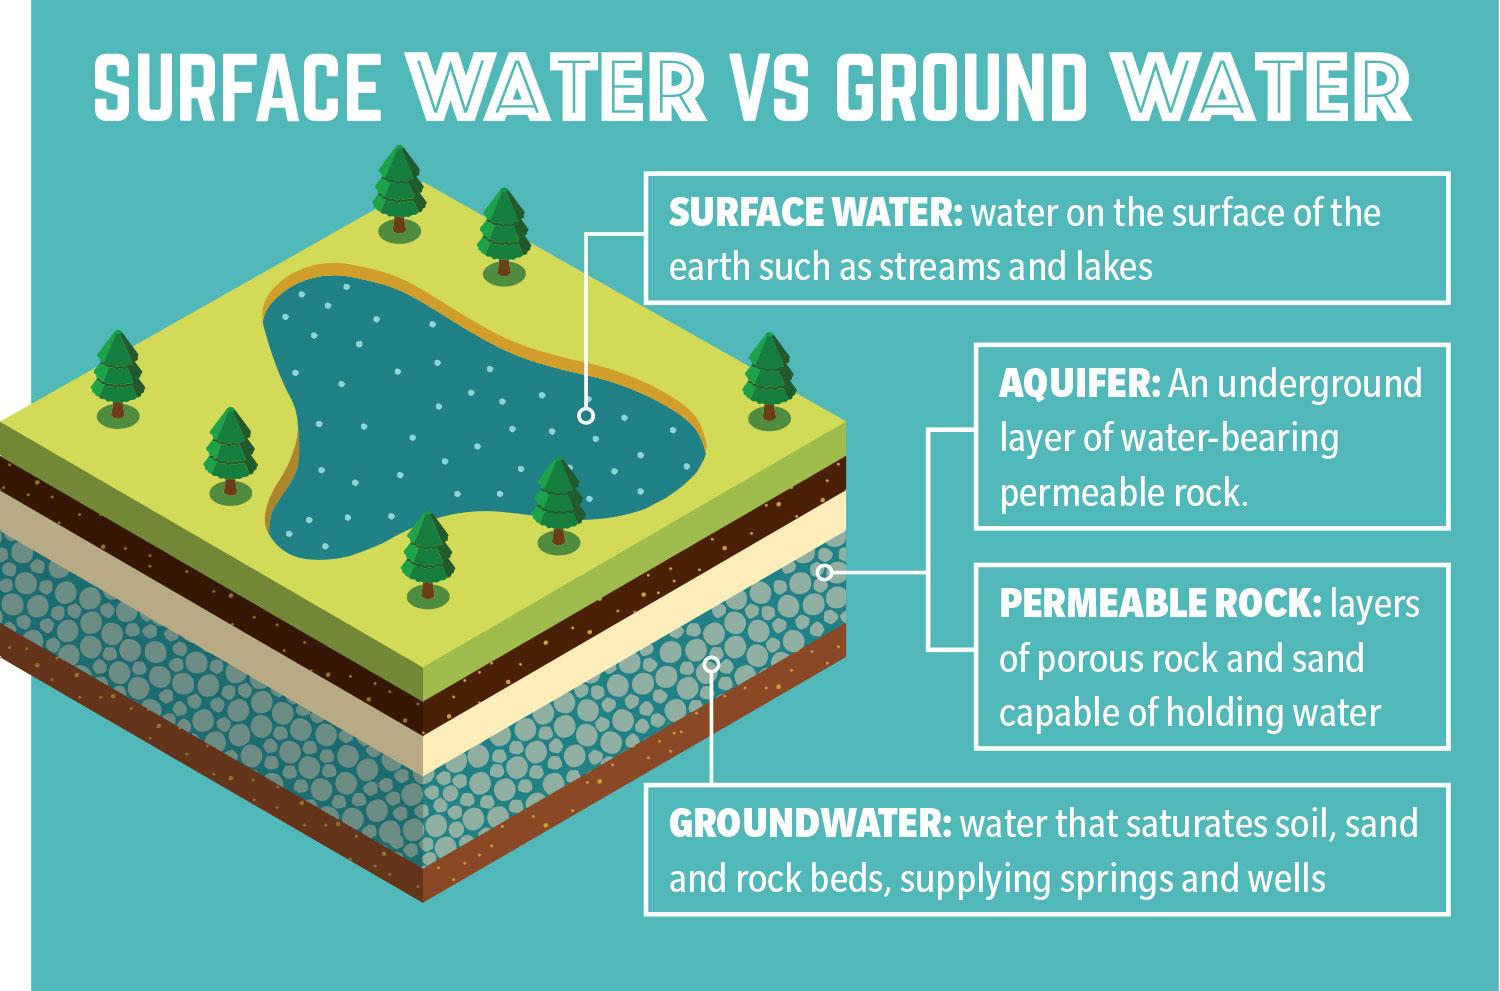 Surface water versus ground water. Surface water is on the surface, like streams and lakes. Ground water saturates soil, sand, rock beds, supplies springs and wells, and can be found in aquifers that are underground layers of permeable rock, which is layers of porous rock and sand.